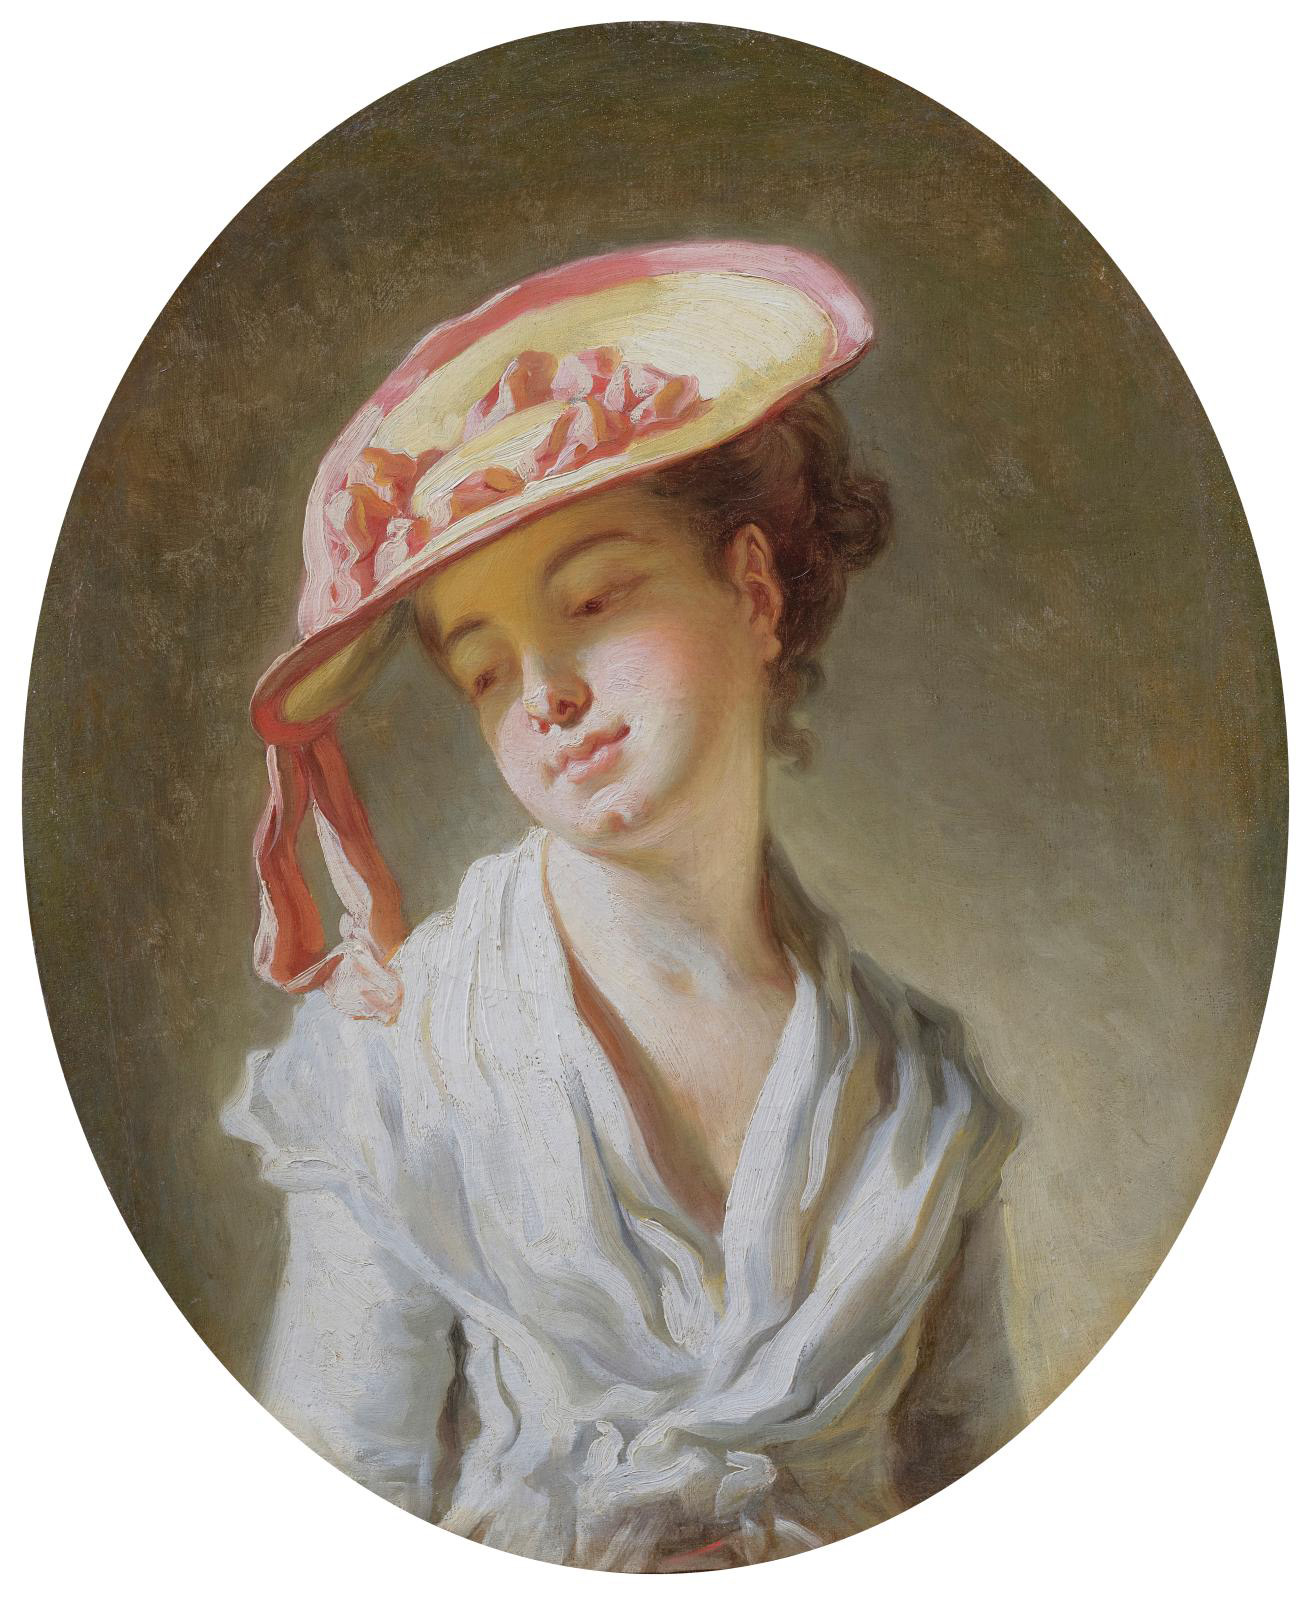  A Young Girl by Jean-Honoré Fragonard Rediscovered